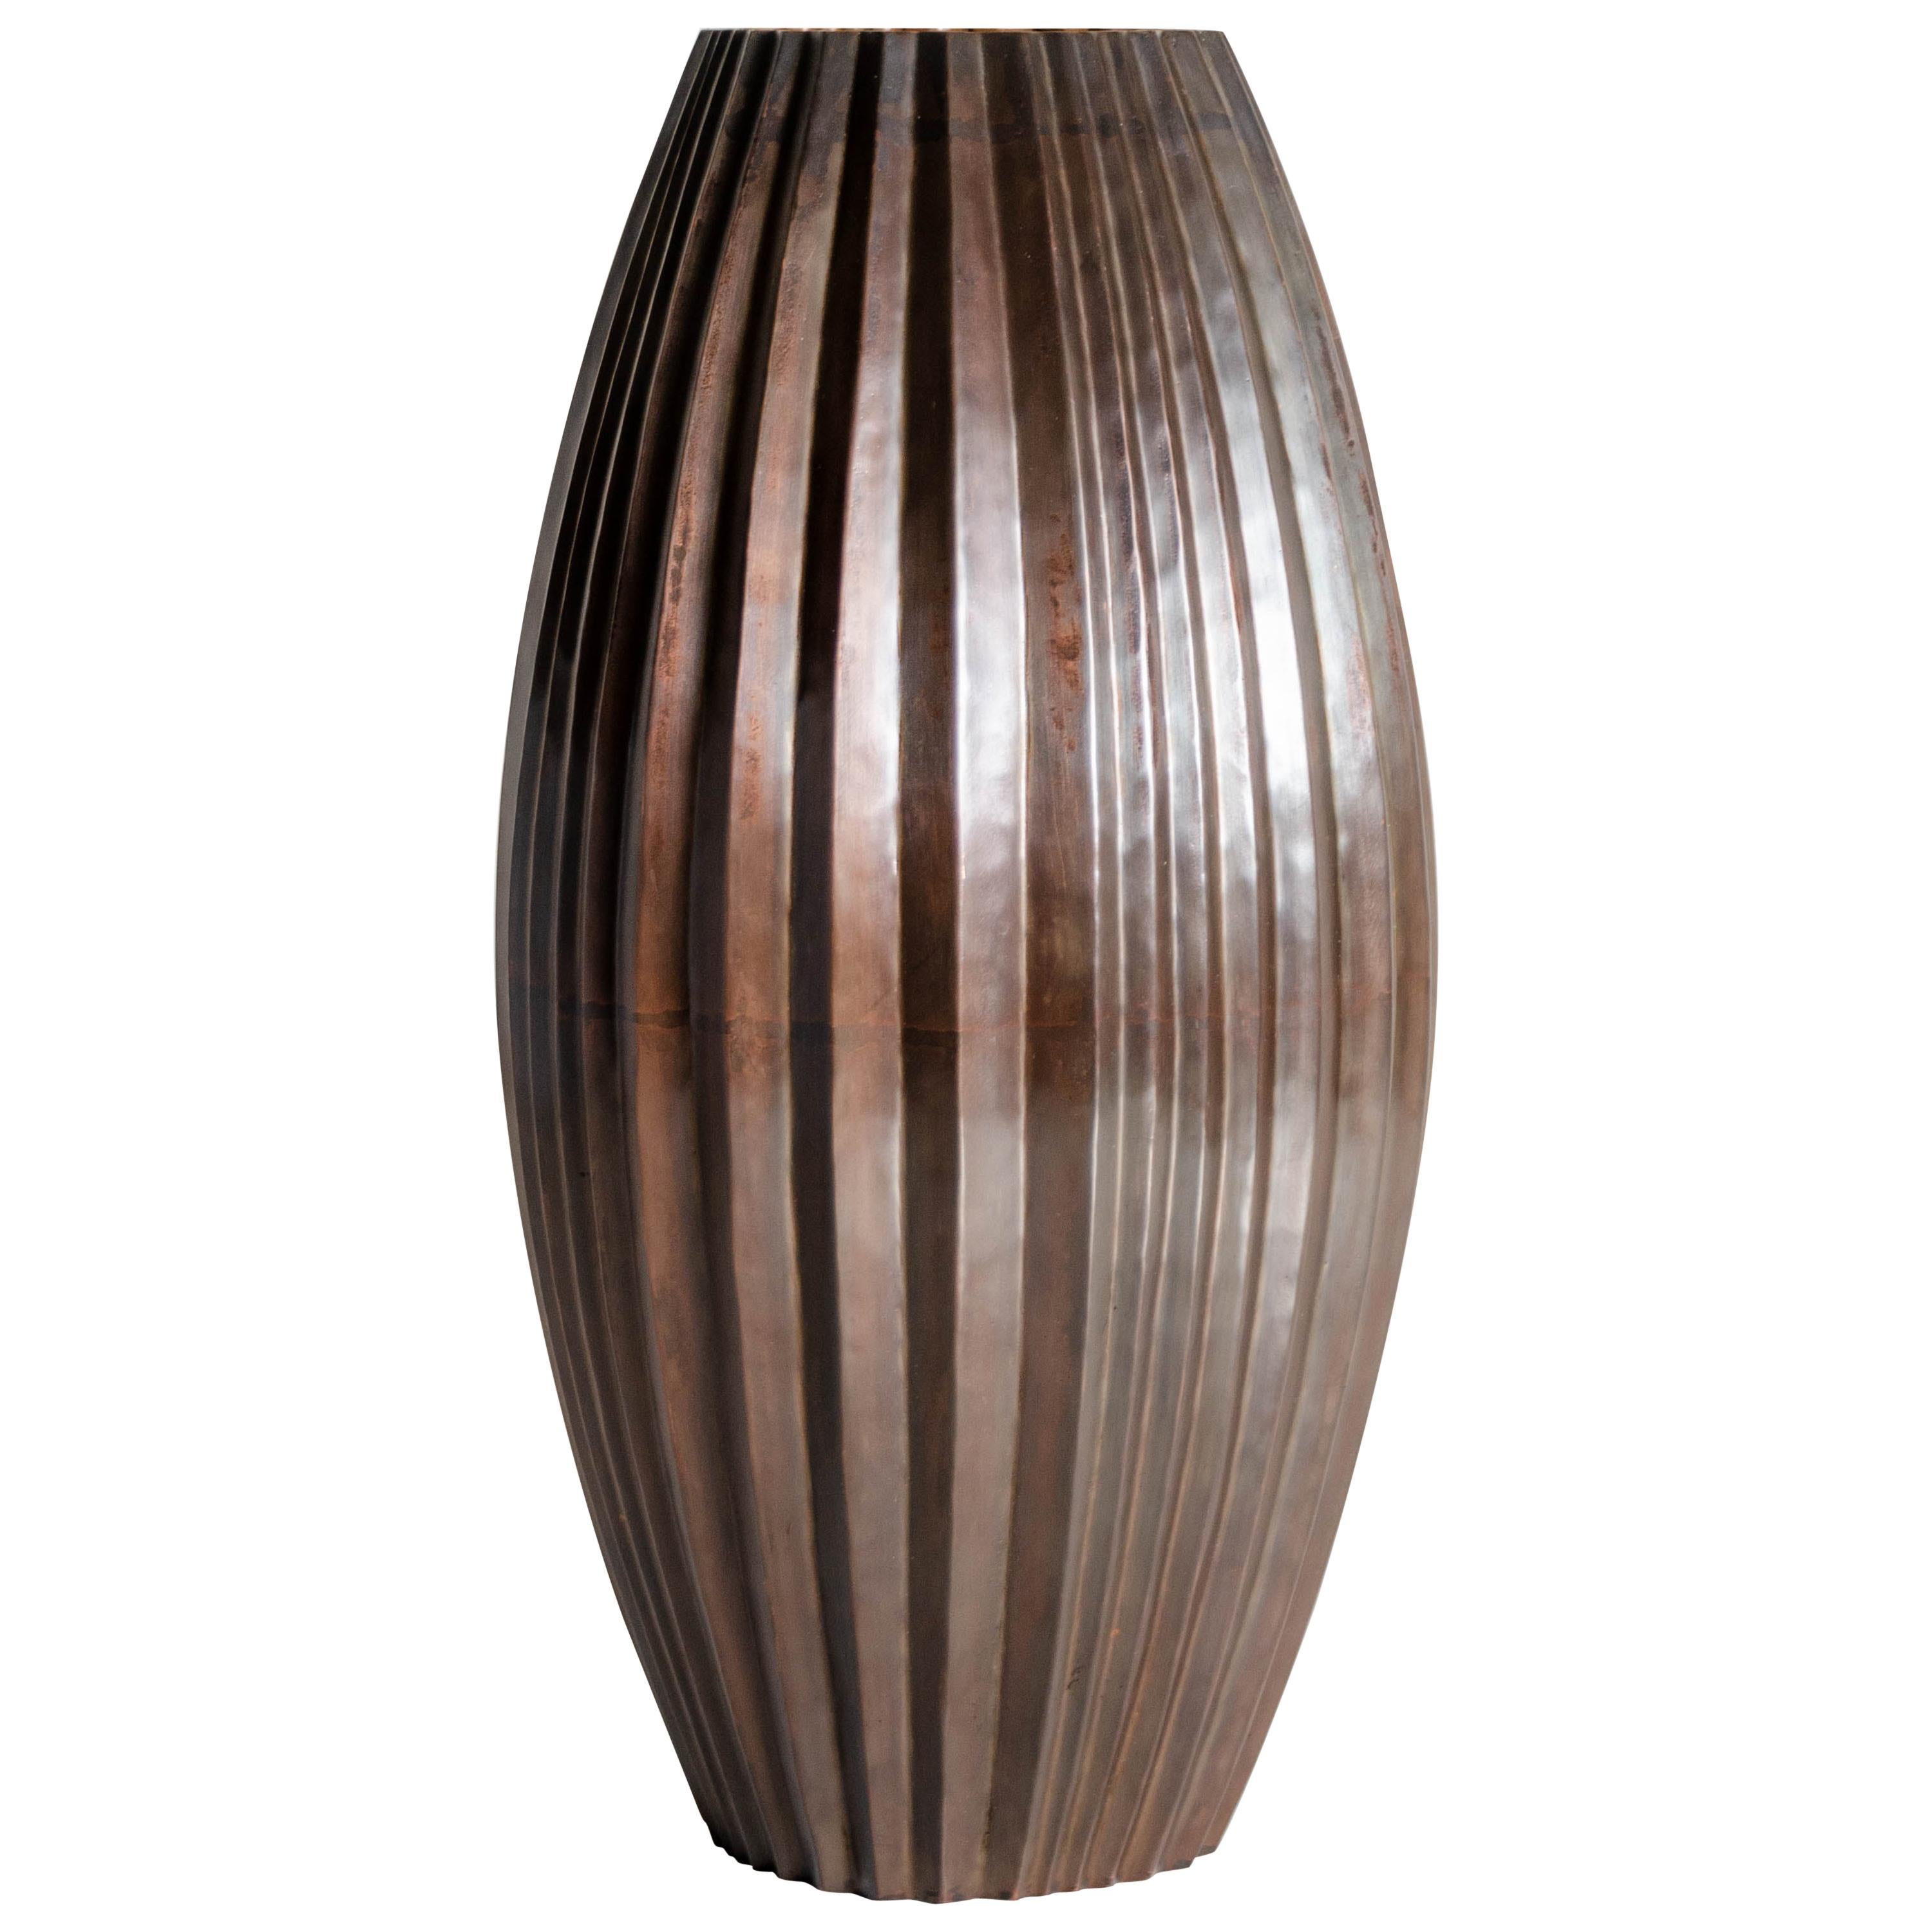 Antique Copper Barrel Vase by Robert Kuo, Hand Repoussé, Limited Edition